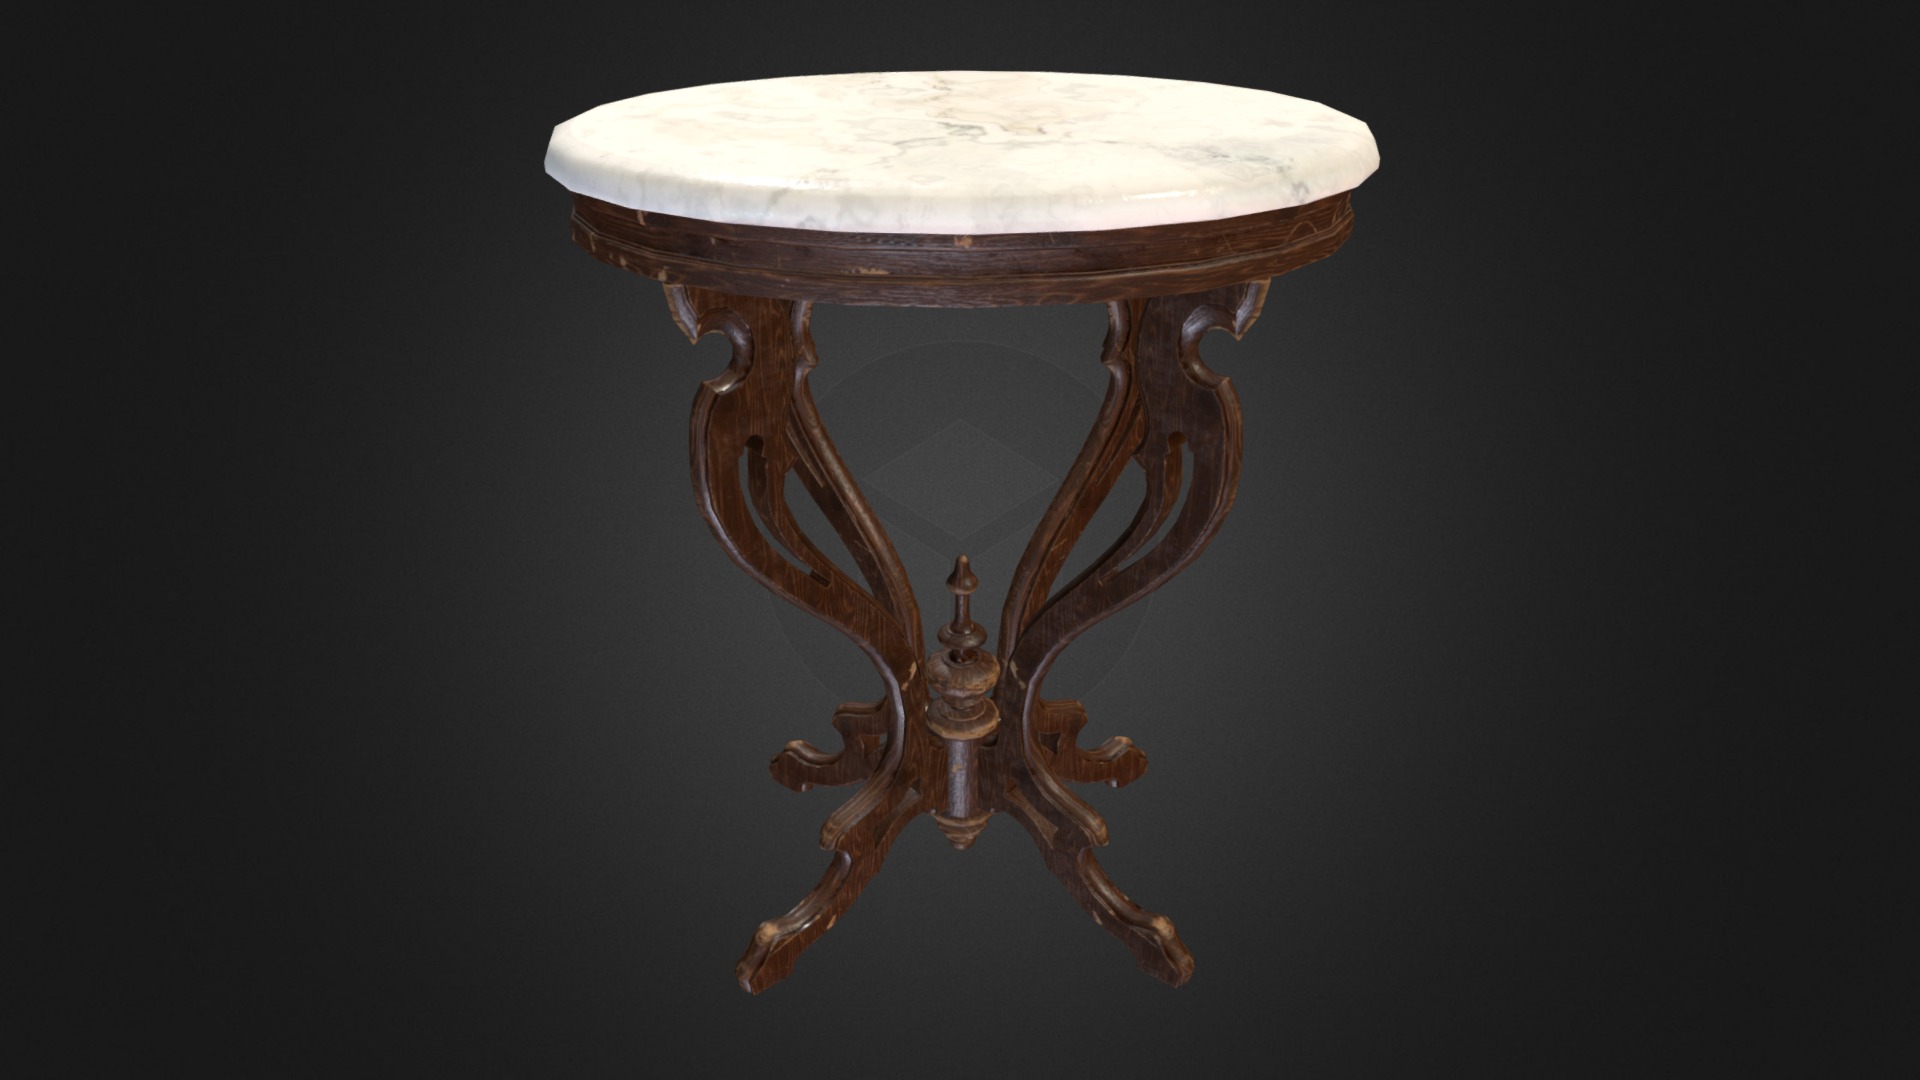 3D model Antique Pedestal Table 001 (Low Poly) V1 - This is a 3D model of the Antique Pedestal Table 001 (Low Poly) V1. The 3D model is about a wooden table with a gold top.